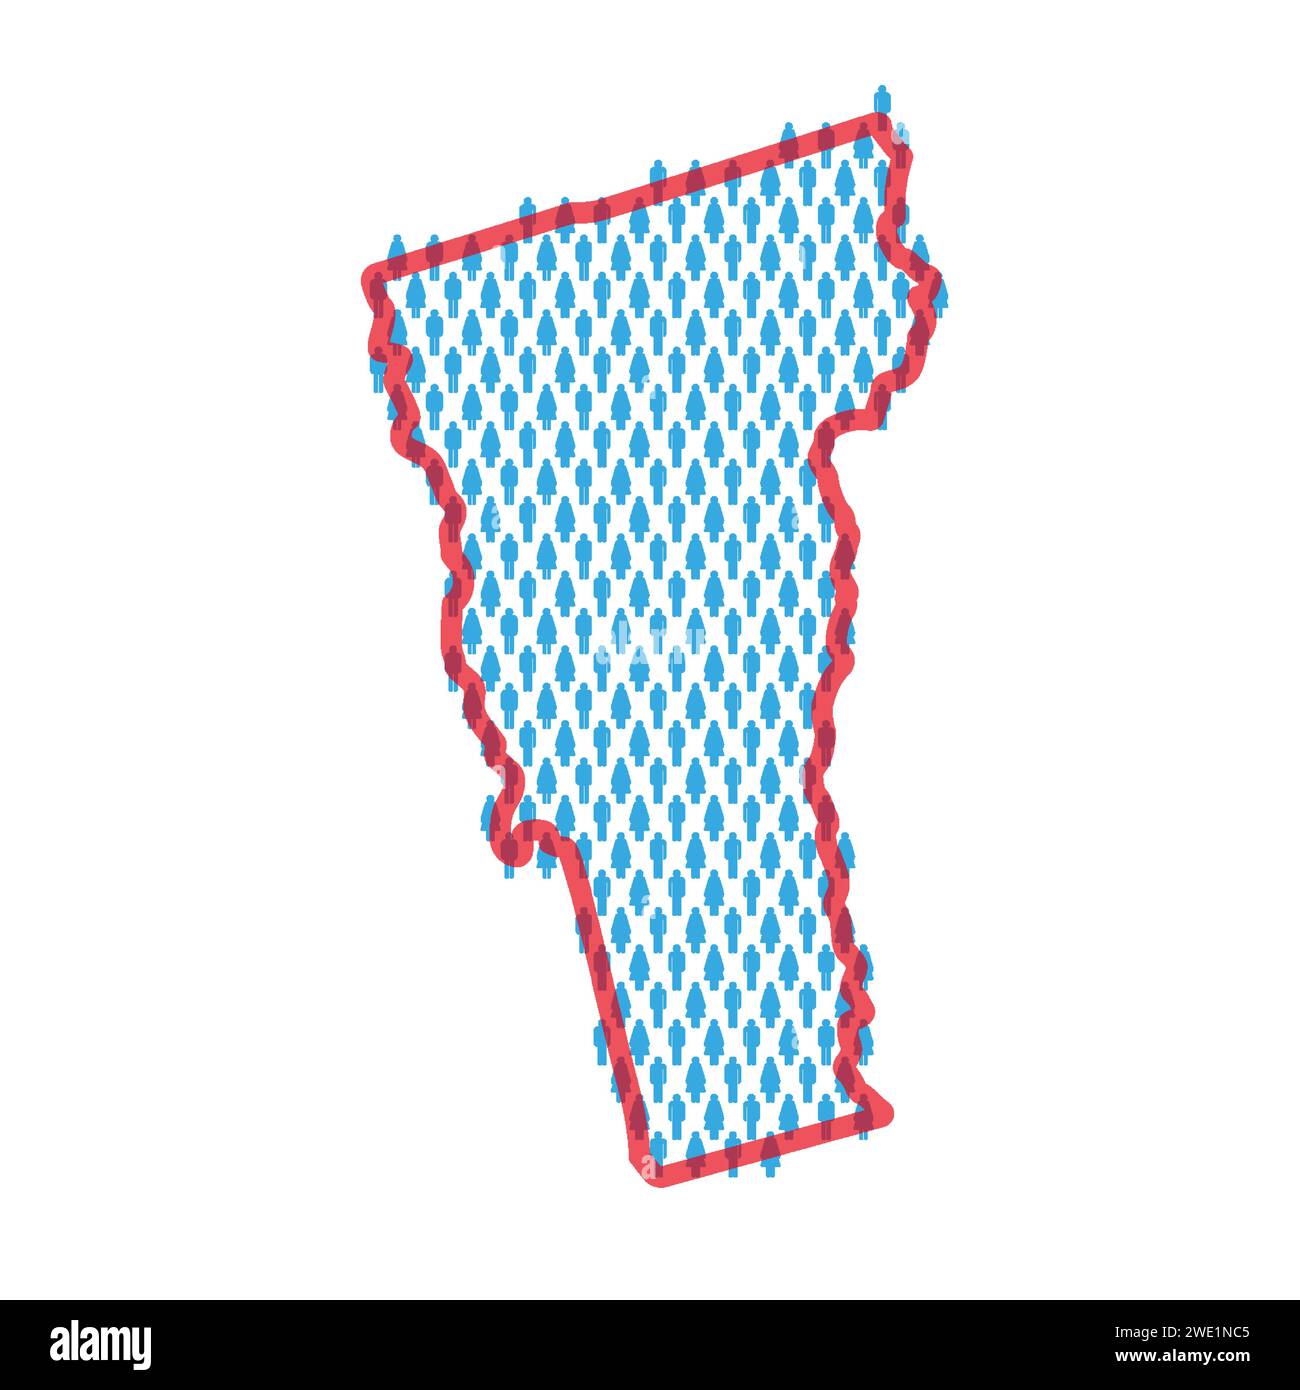 Vermont population map. Stick figures people map with bold red translucent state border. Pattern of men and women icons. Isolated vector illustration. Stock Vector